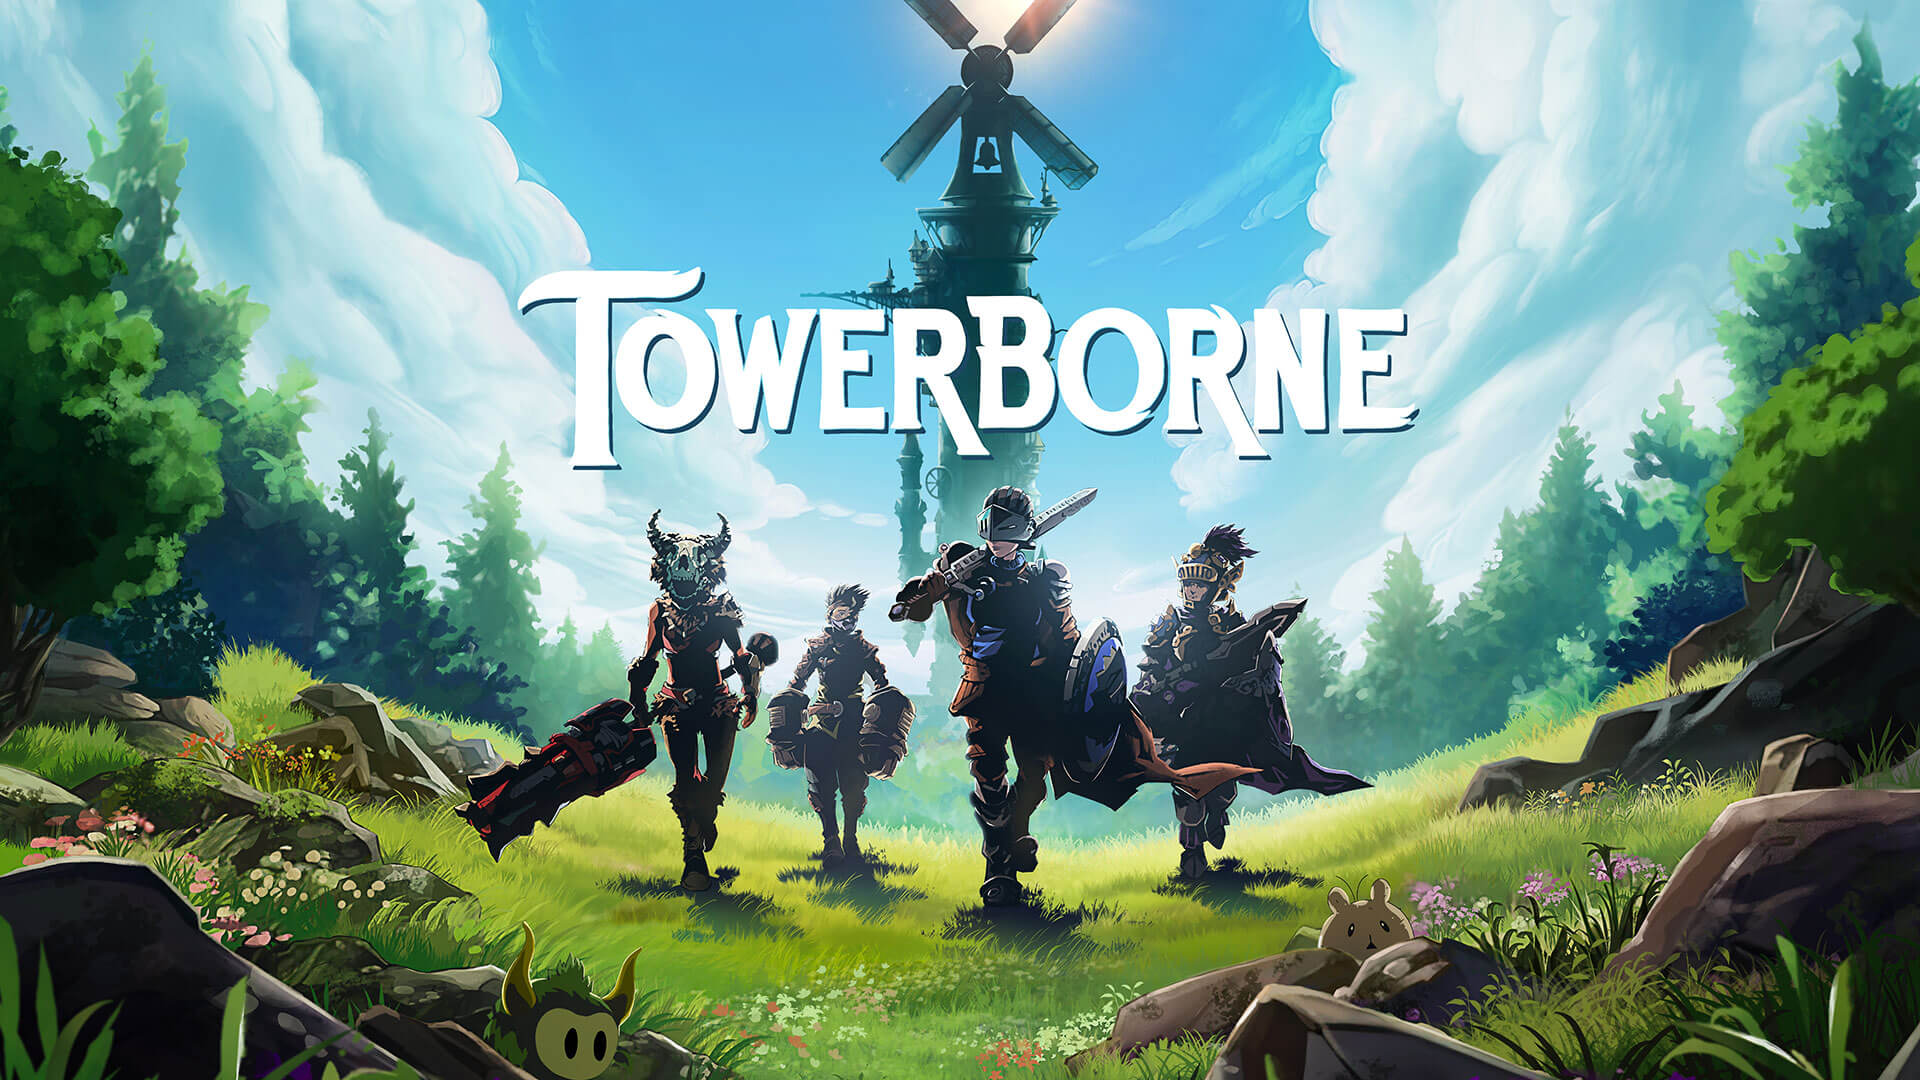 Four armored heroes stand in the foreground, a tower behind them. A blue sky with clouds and green grass is the background, with mossy rocks and small creatures peaking out from the bottom.